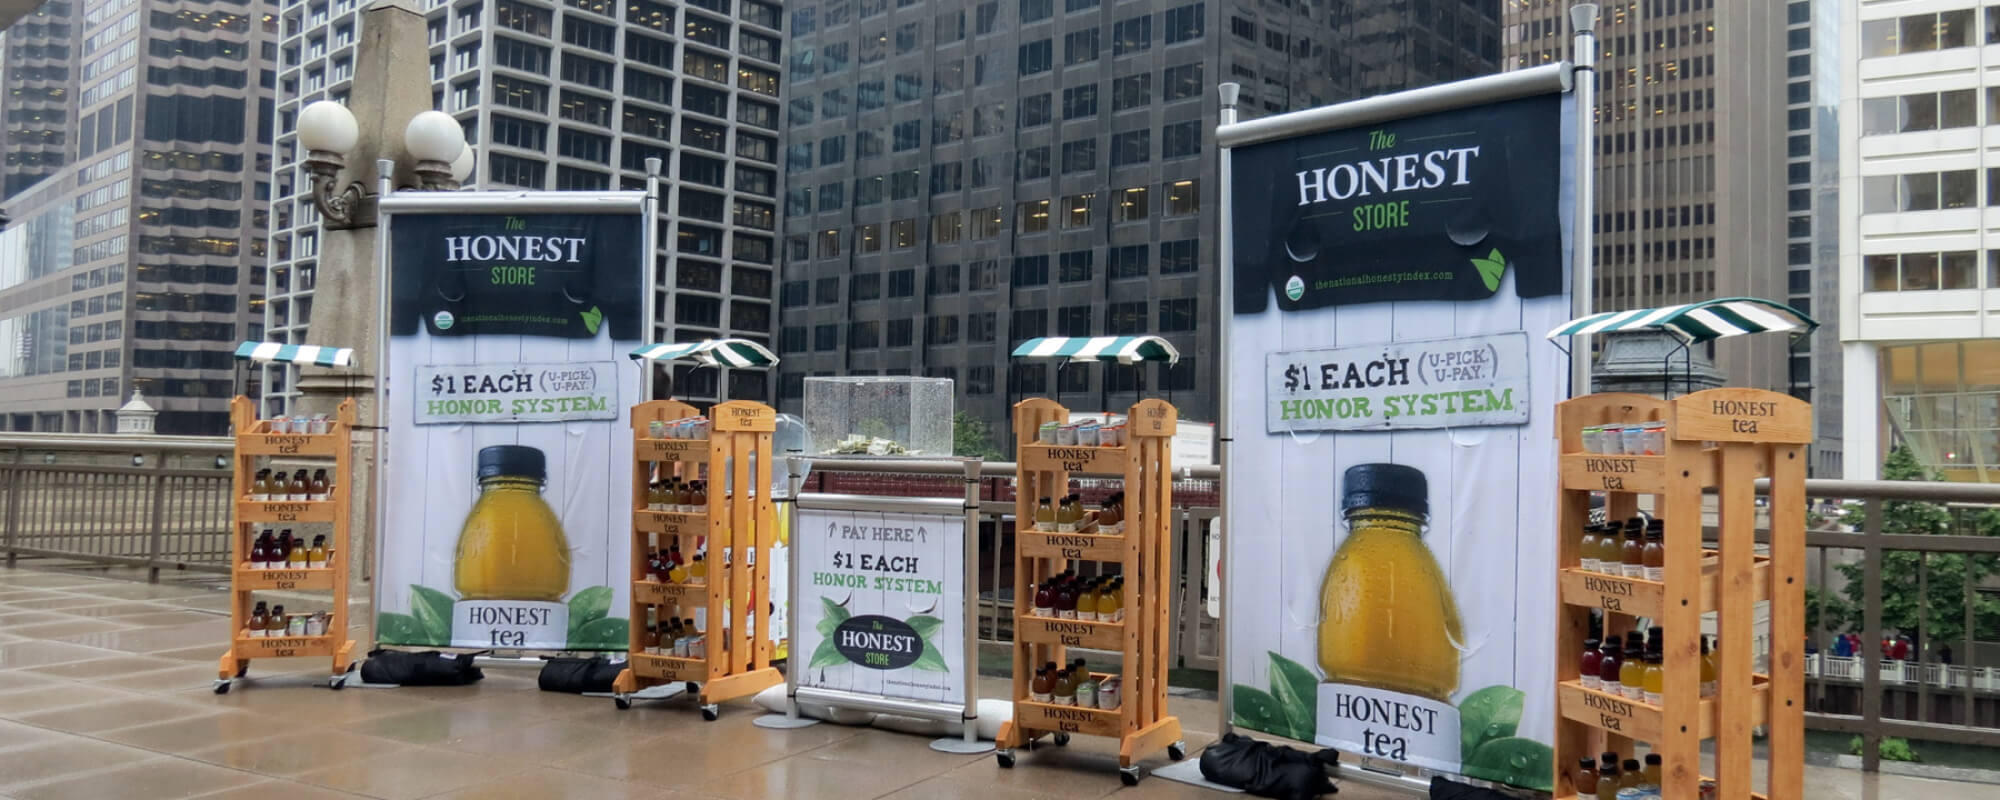 giant tea bottles with banners